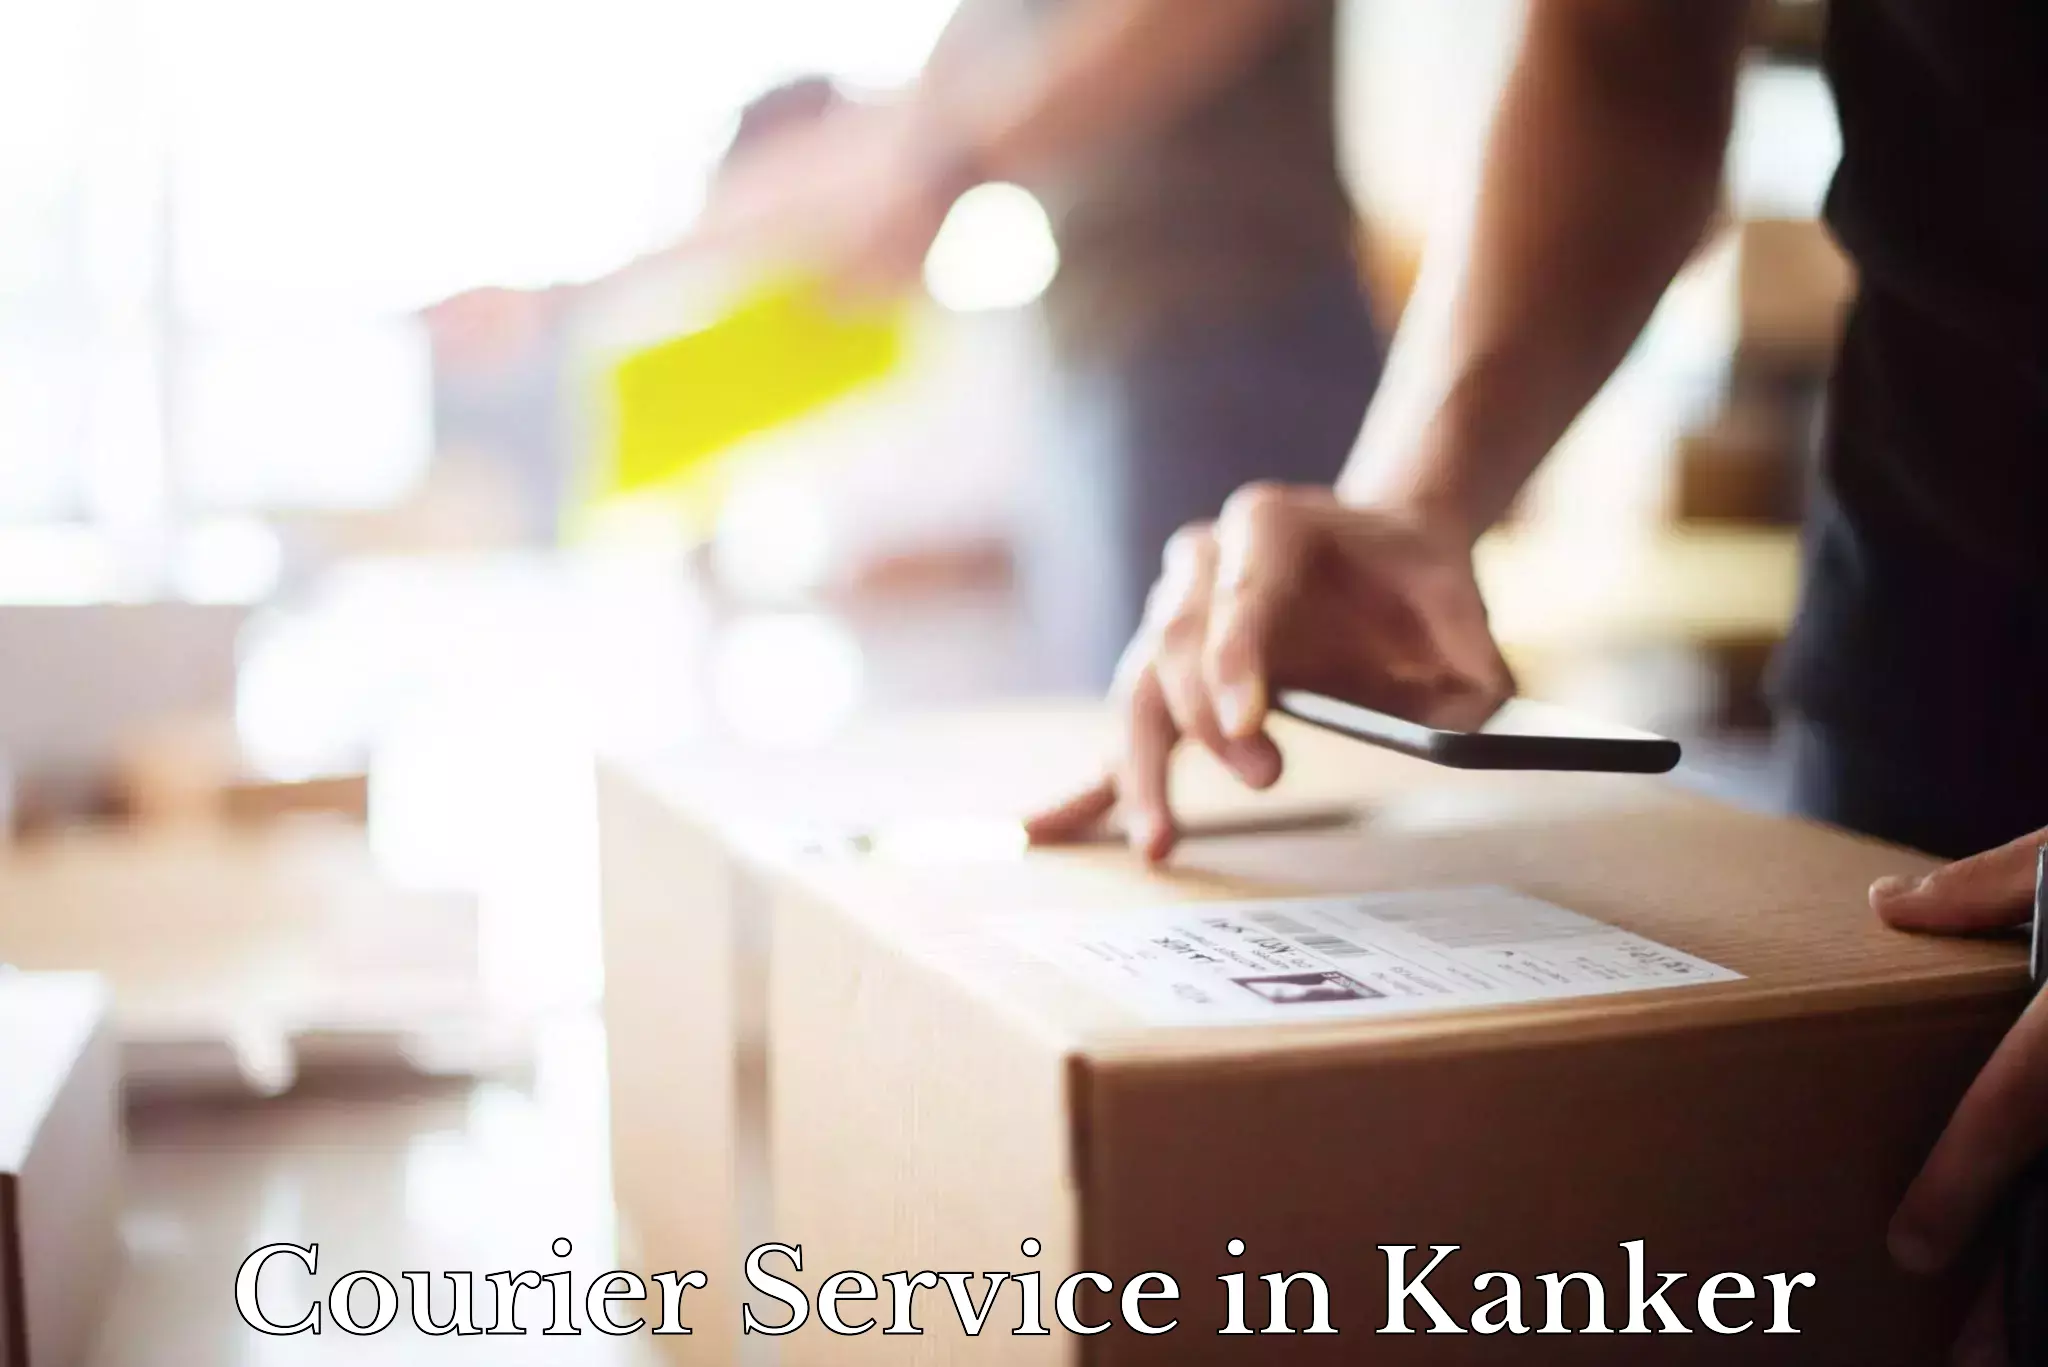 Streamlined delivery processes in Kanker